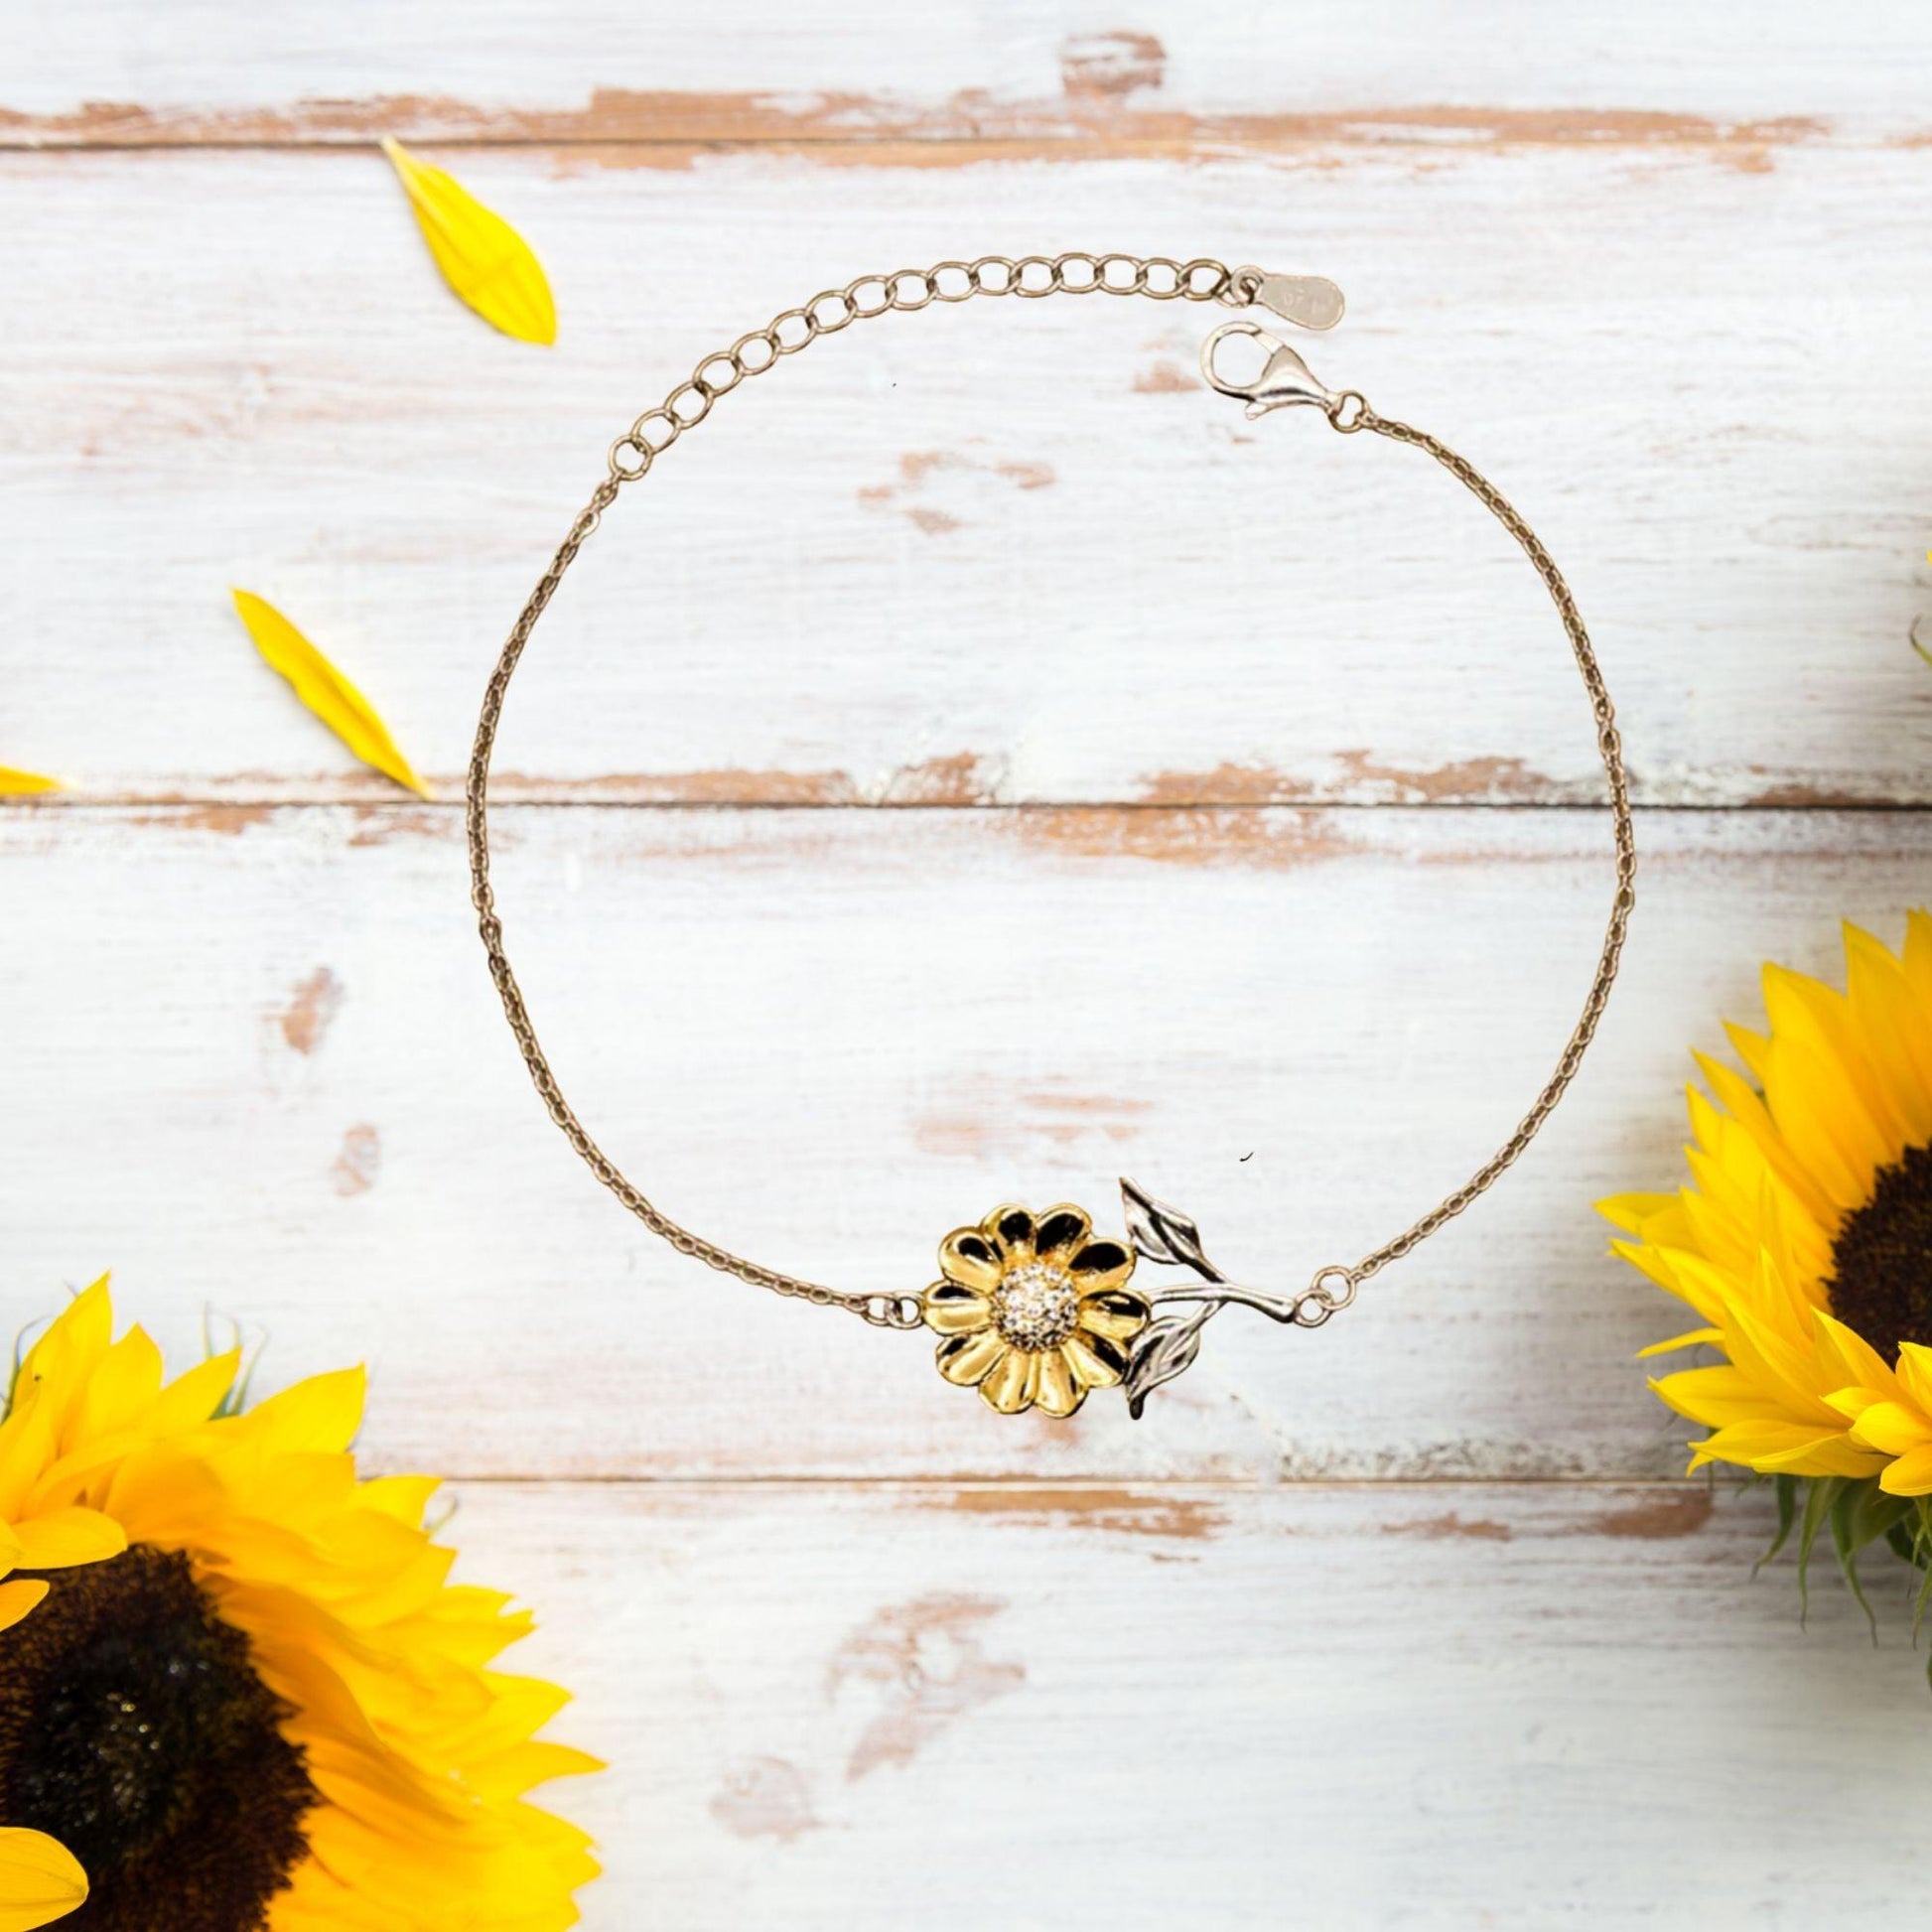 Remarkable General Manager Gifts, Your dedication and hard work, Inspirational Birthday Christmas Unique Sunflower Bracelet For General Manager, Coworkers, Men, Women, Friends - Mallard Moon Gift Shop